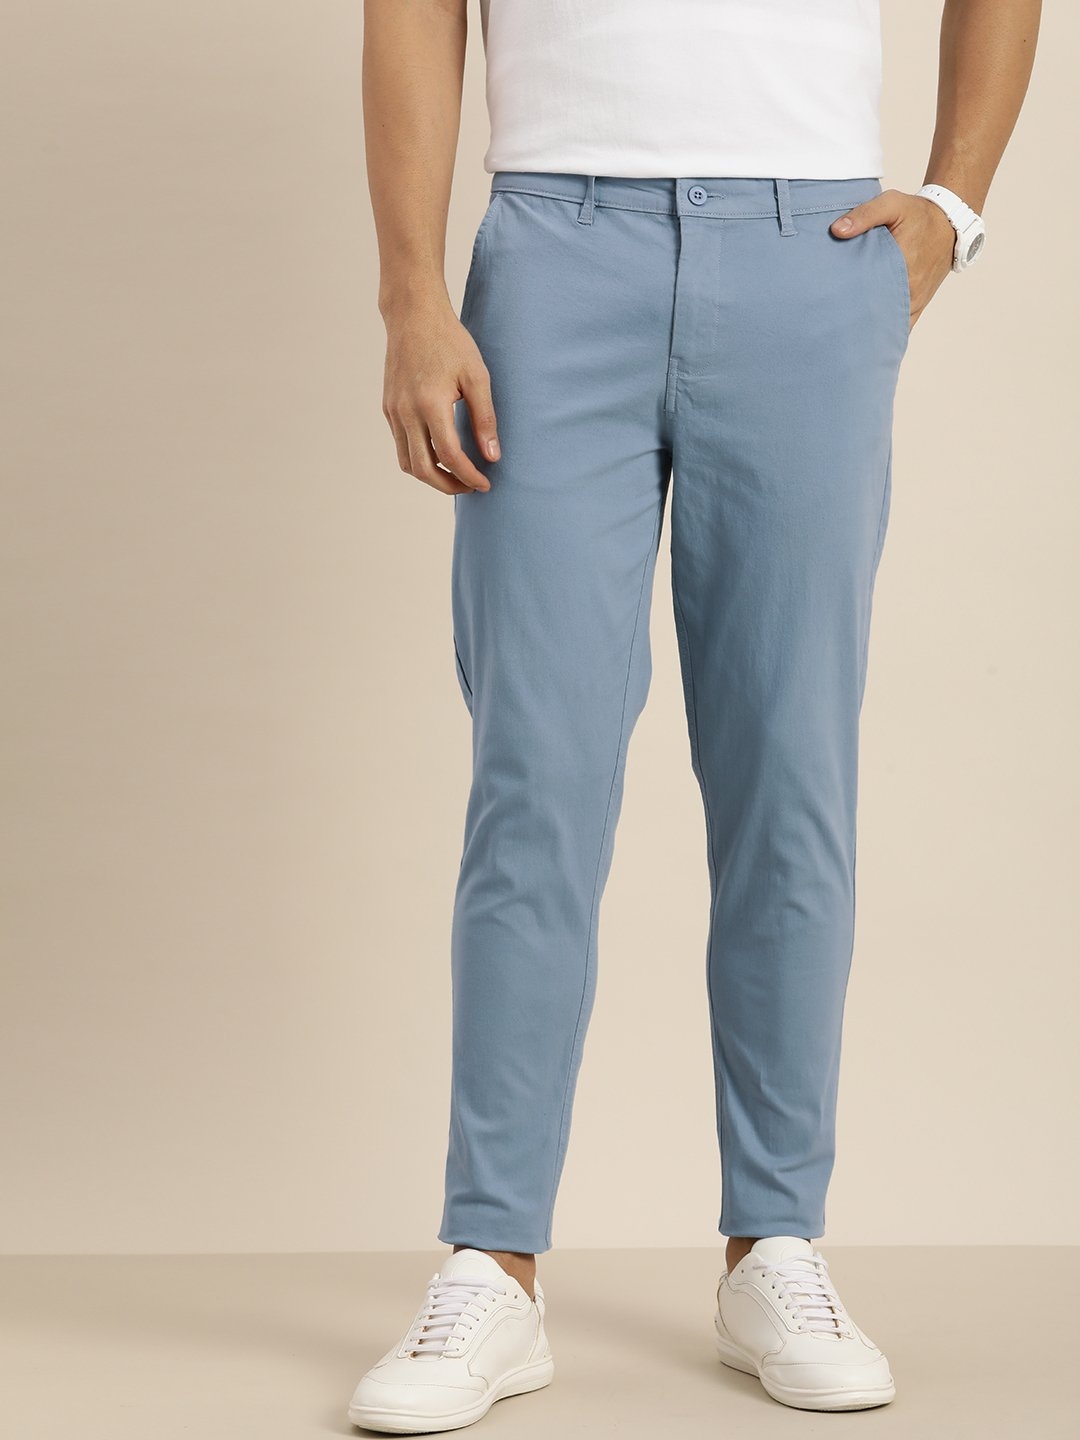 Difference of Opinion | Difference of Opinion Blue Solid Angle Length Trouser